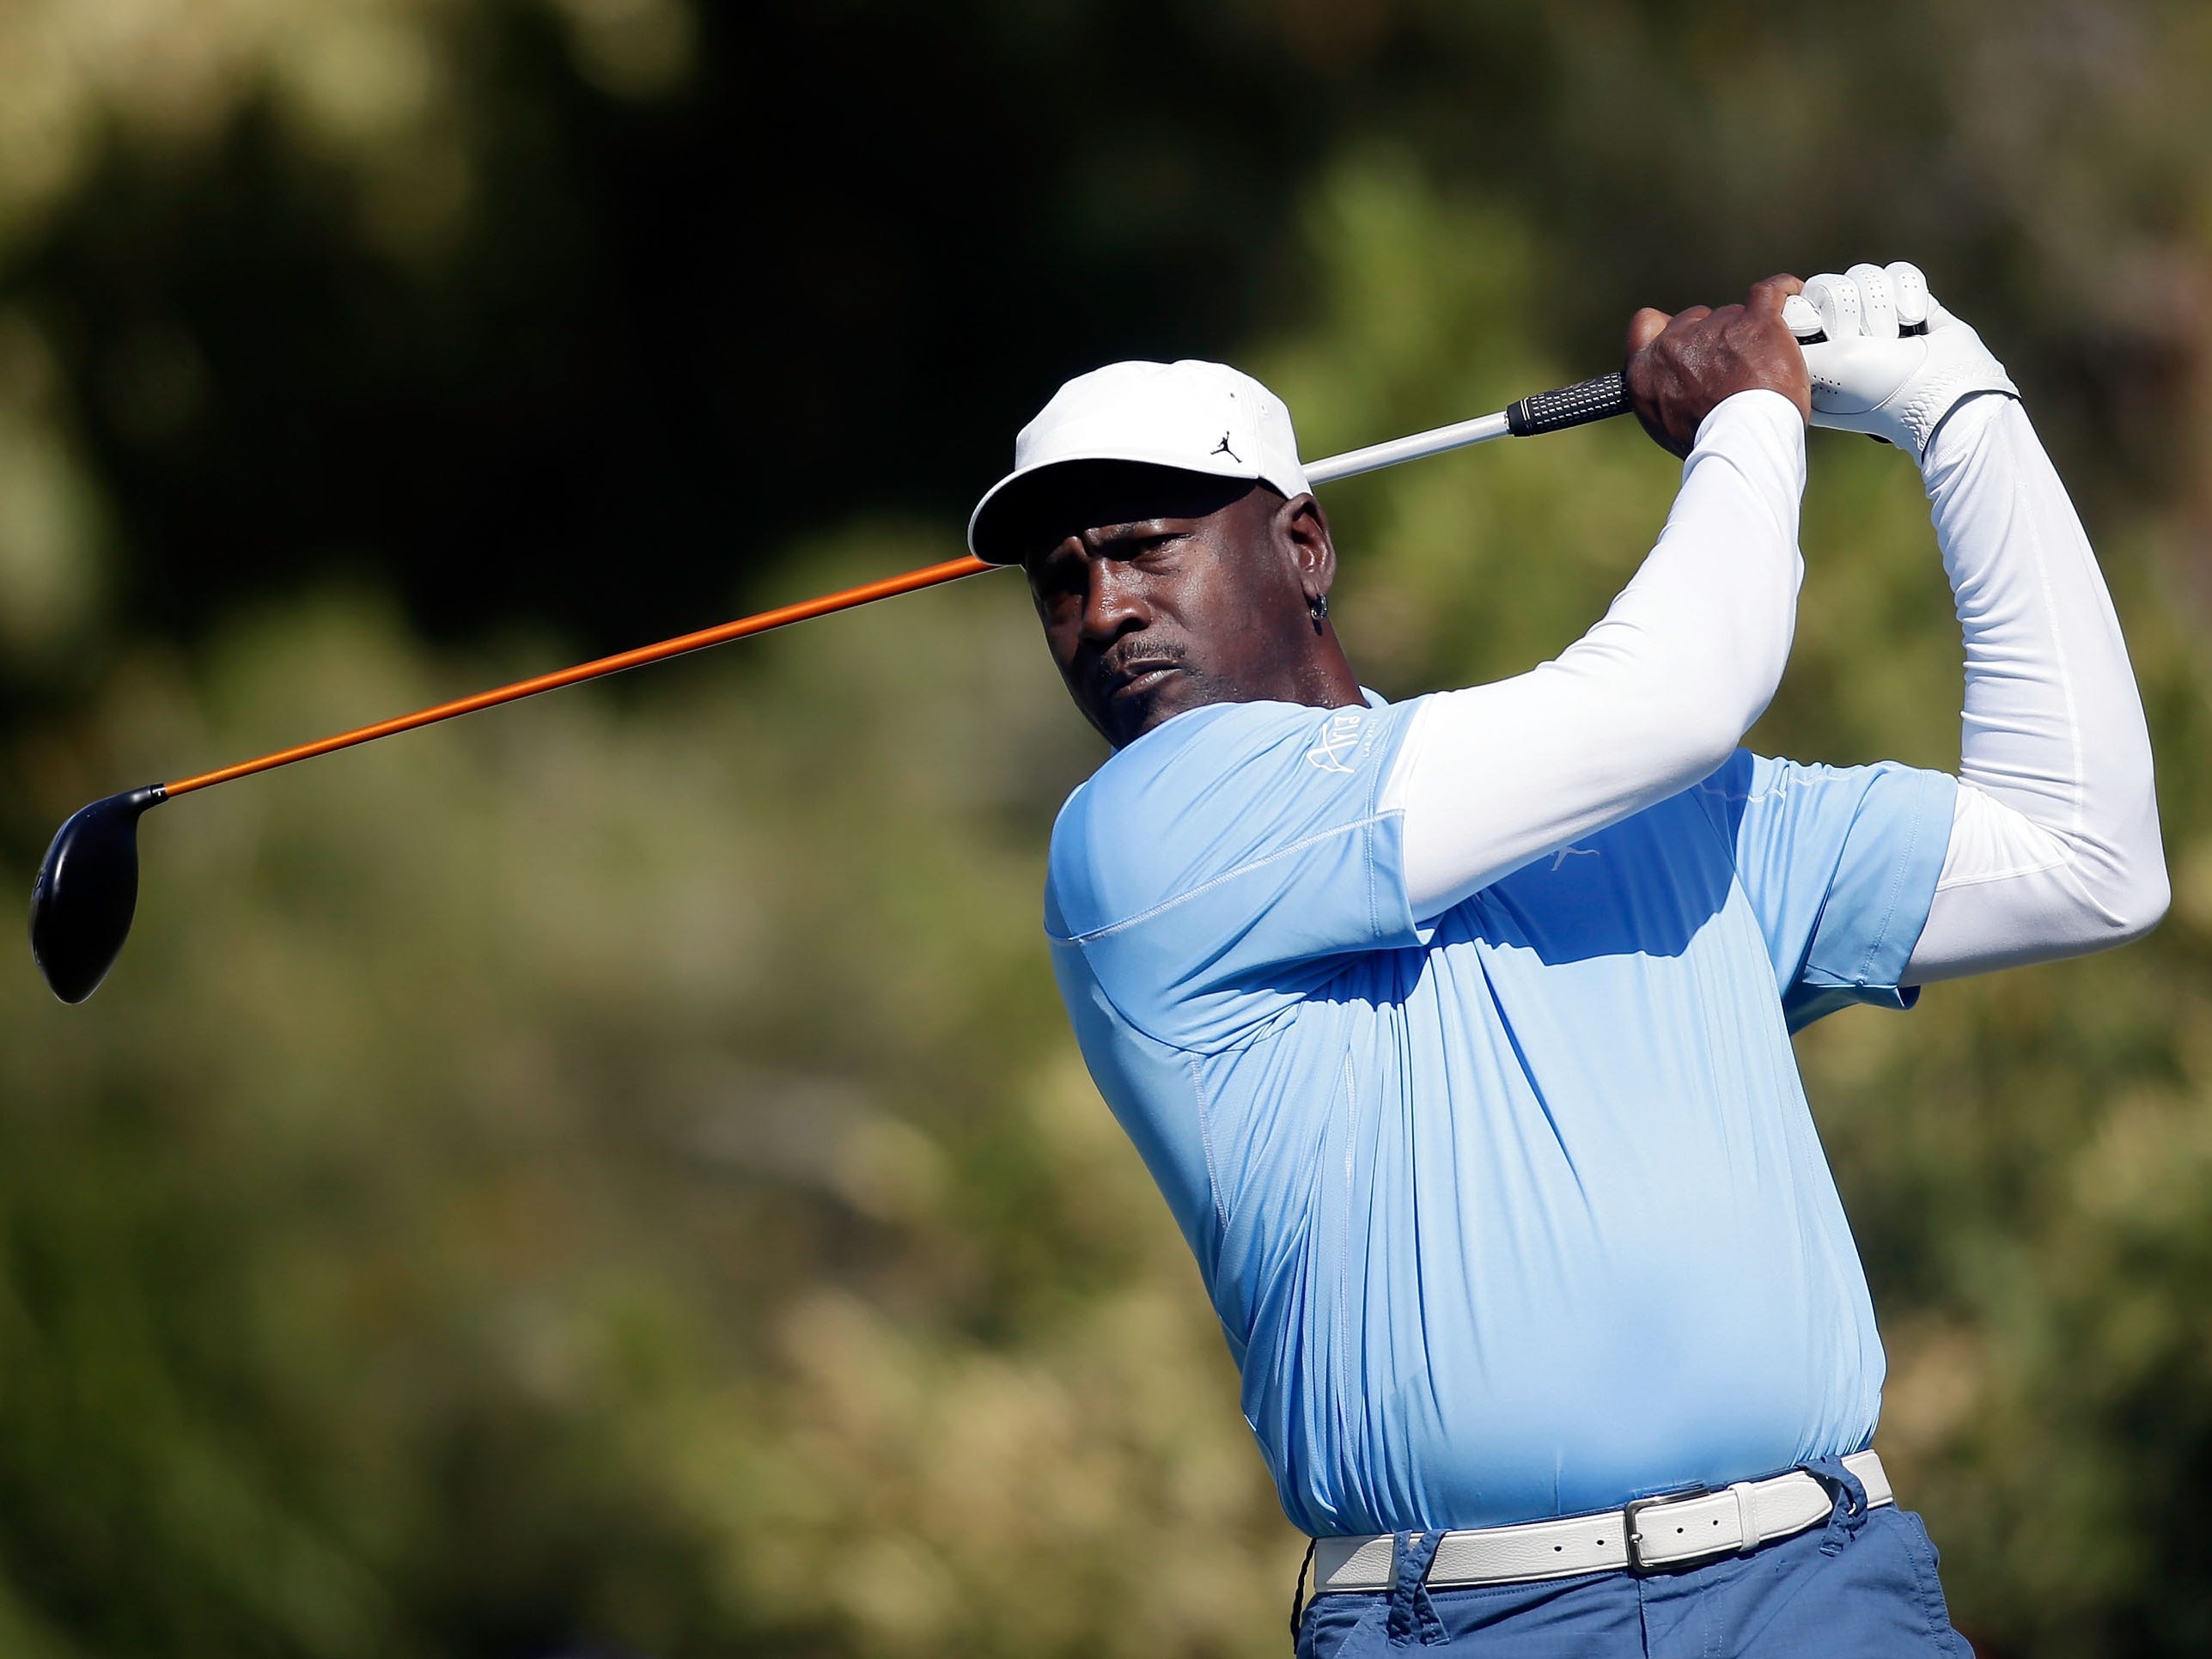 <p>Business Insider reported in 2021 that <a href="https://www.businessinsider.com/michael-jordan-grove-xxiii-23-golf-course-2021-4">Michael Jordan's exclusive golf course</a> in Hobe Sound, Florida, has fewer than 80 members. Some famous names allowed in include former president Barack Obama, former tennis player John McEnroe, and current PGA Tour pros Rickie Fowler and Dustin Johnson.</p><p>As you can probably guess, you'd either need to know Jordan — or he'd want to get to know you — for you to get an invite to this ultra-exclusive club.</p><p>"Michael Jordan is a huge fan of golf, and even when he was playing for the Chicago Bulls, apparently, in between games, he would go and play golf," said Carrega. "So he's always been very into the sport."</p><p>Jordan even <a href="https://www.businessinsider.com/michael-jordan-private-golf-tournament-grove-23-trophy-tequila-2023-9">hosts an exclusive tournament</a>, gifting winner Keegan Bradley a $4,000 bottle of his tequila, Cincoro Extra Añejo, in 2023.</p>